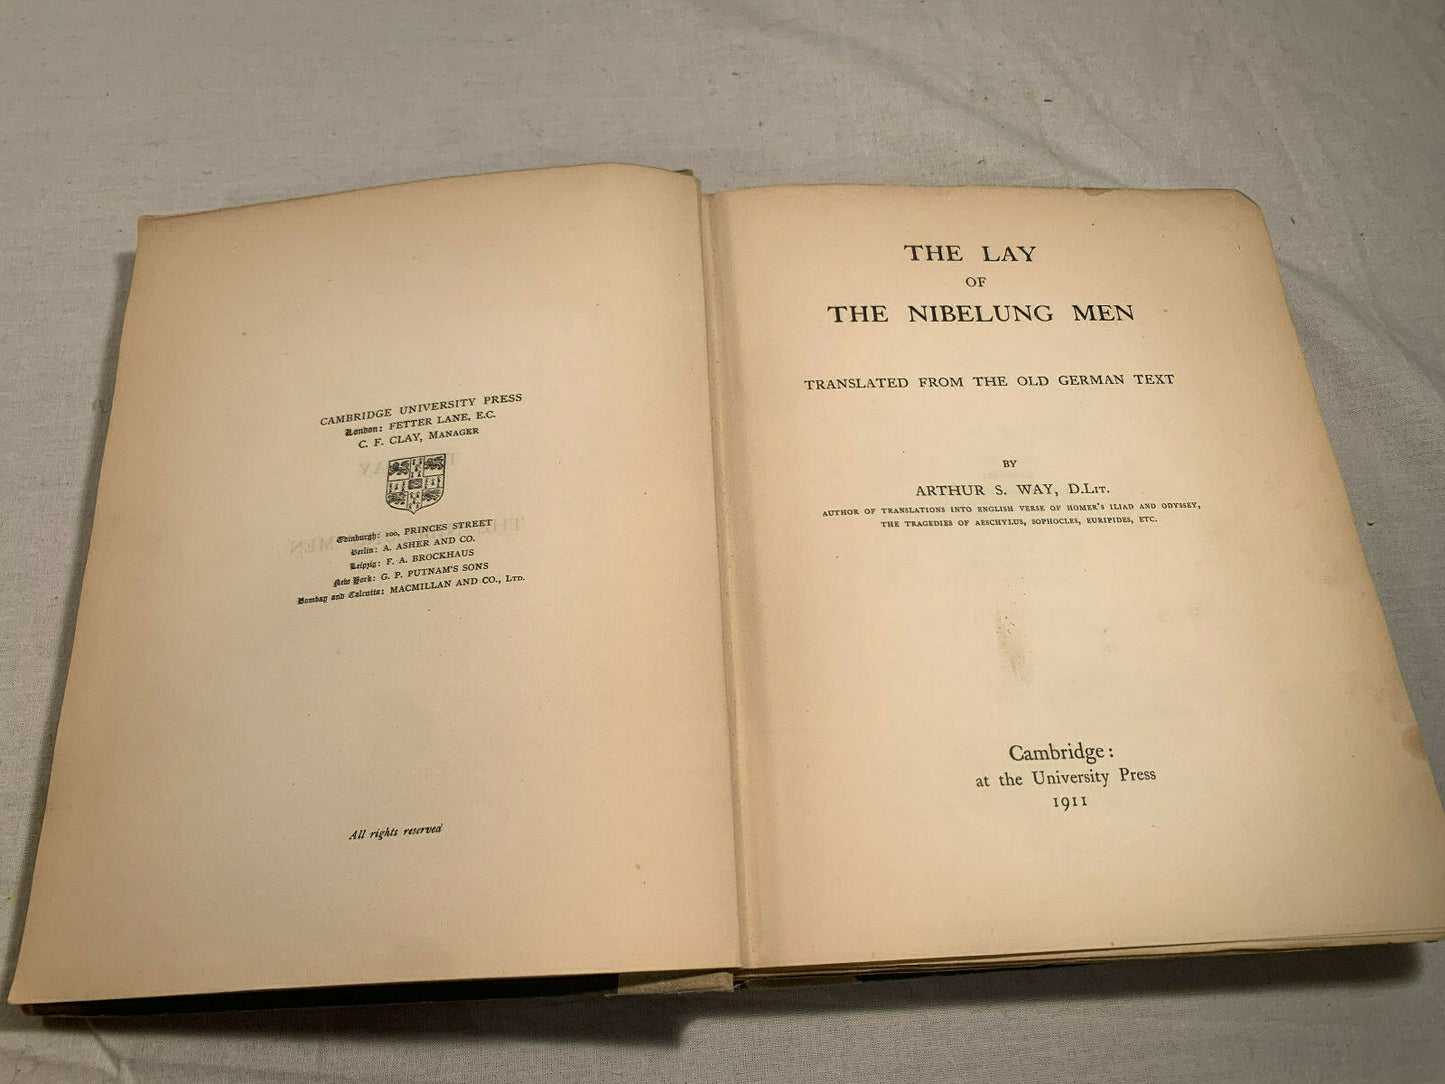 The Lay of The Nibelung Men translated by Arhur S. Way [1911]